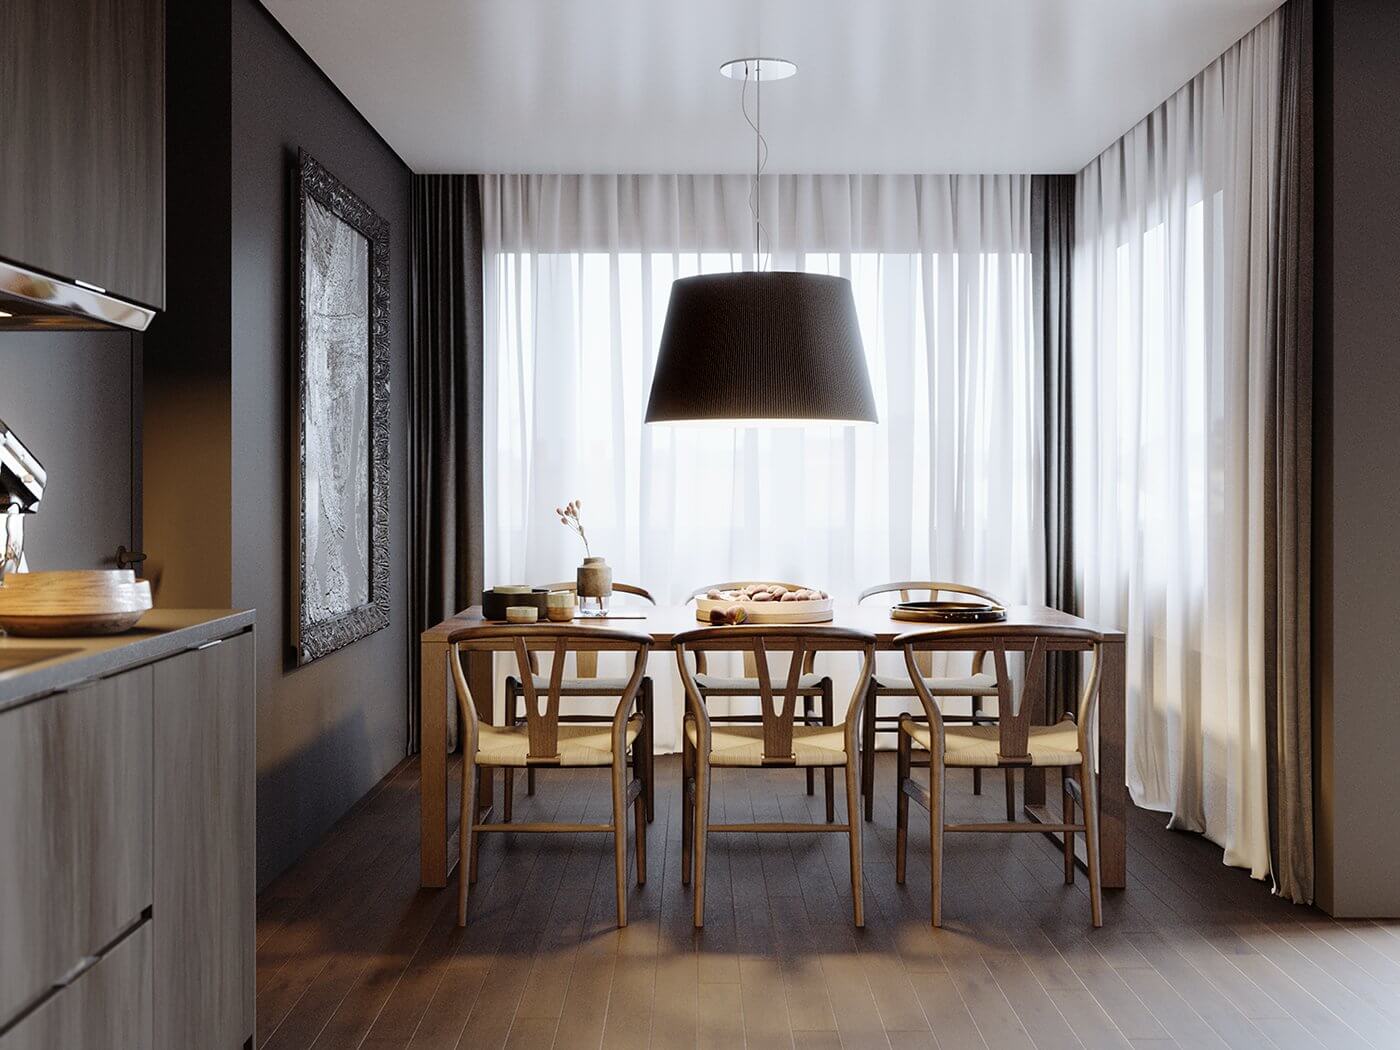 Apartment in munich dining room table chair - cgi visualization